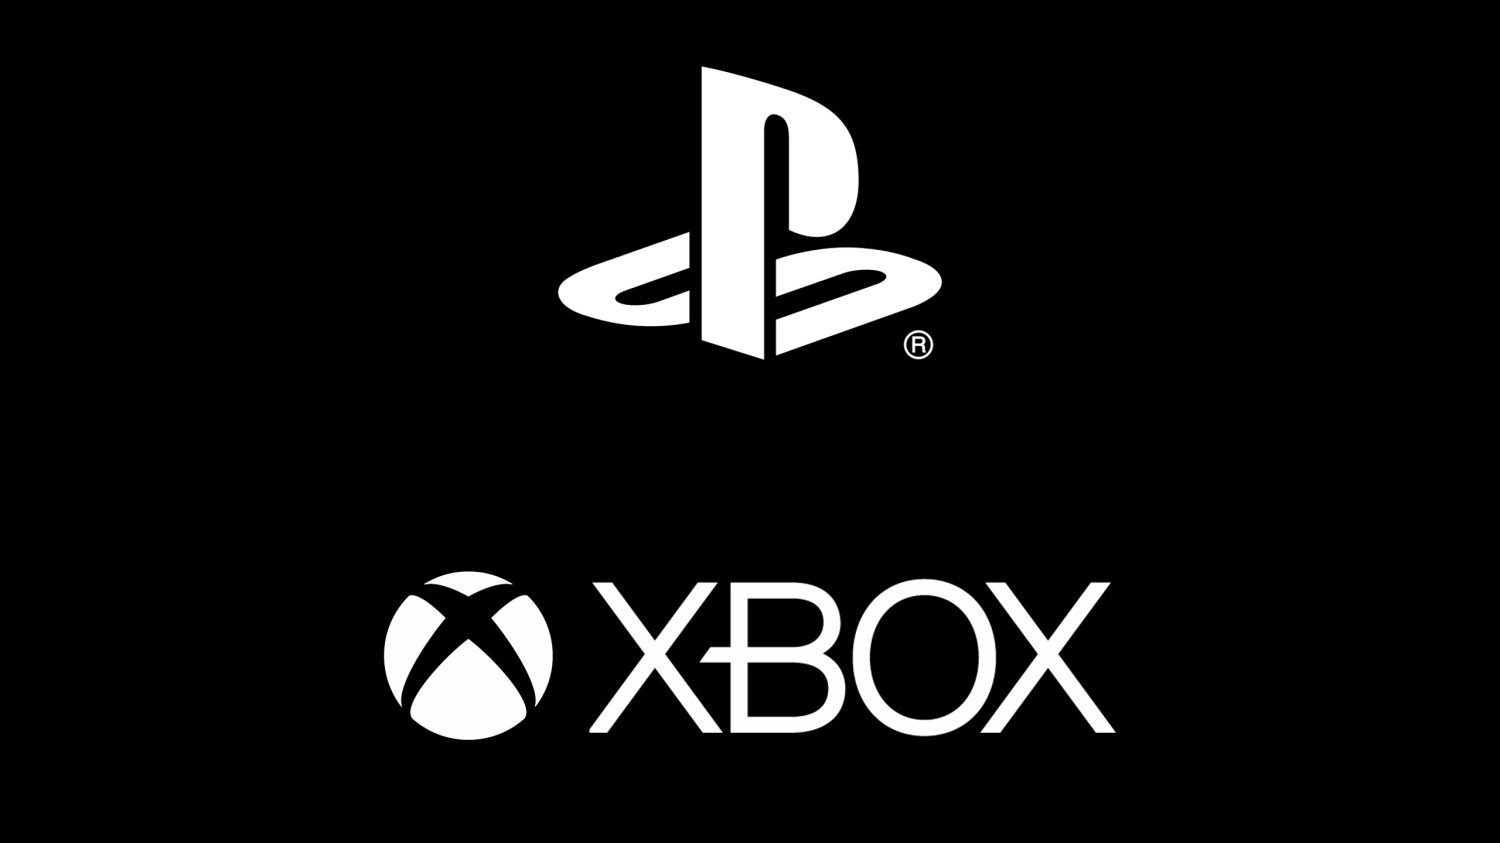 buik Slager Doodt PlayStation made $8.8 billion more than Xbox in 2022